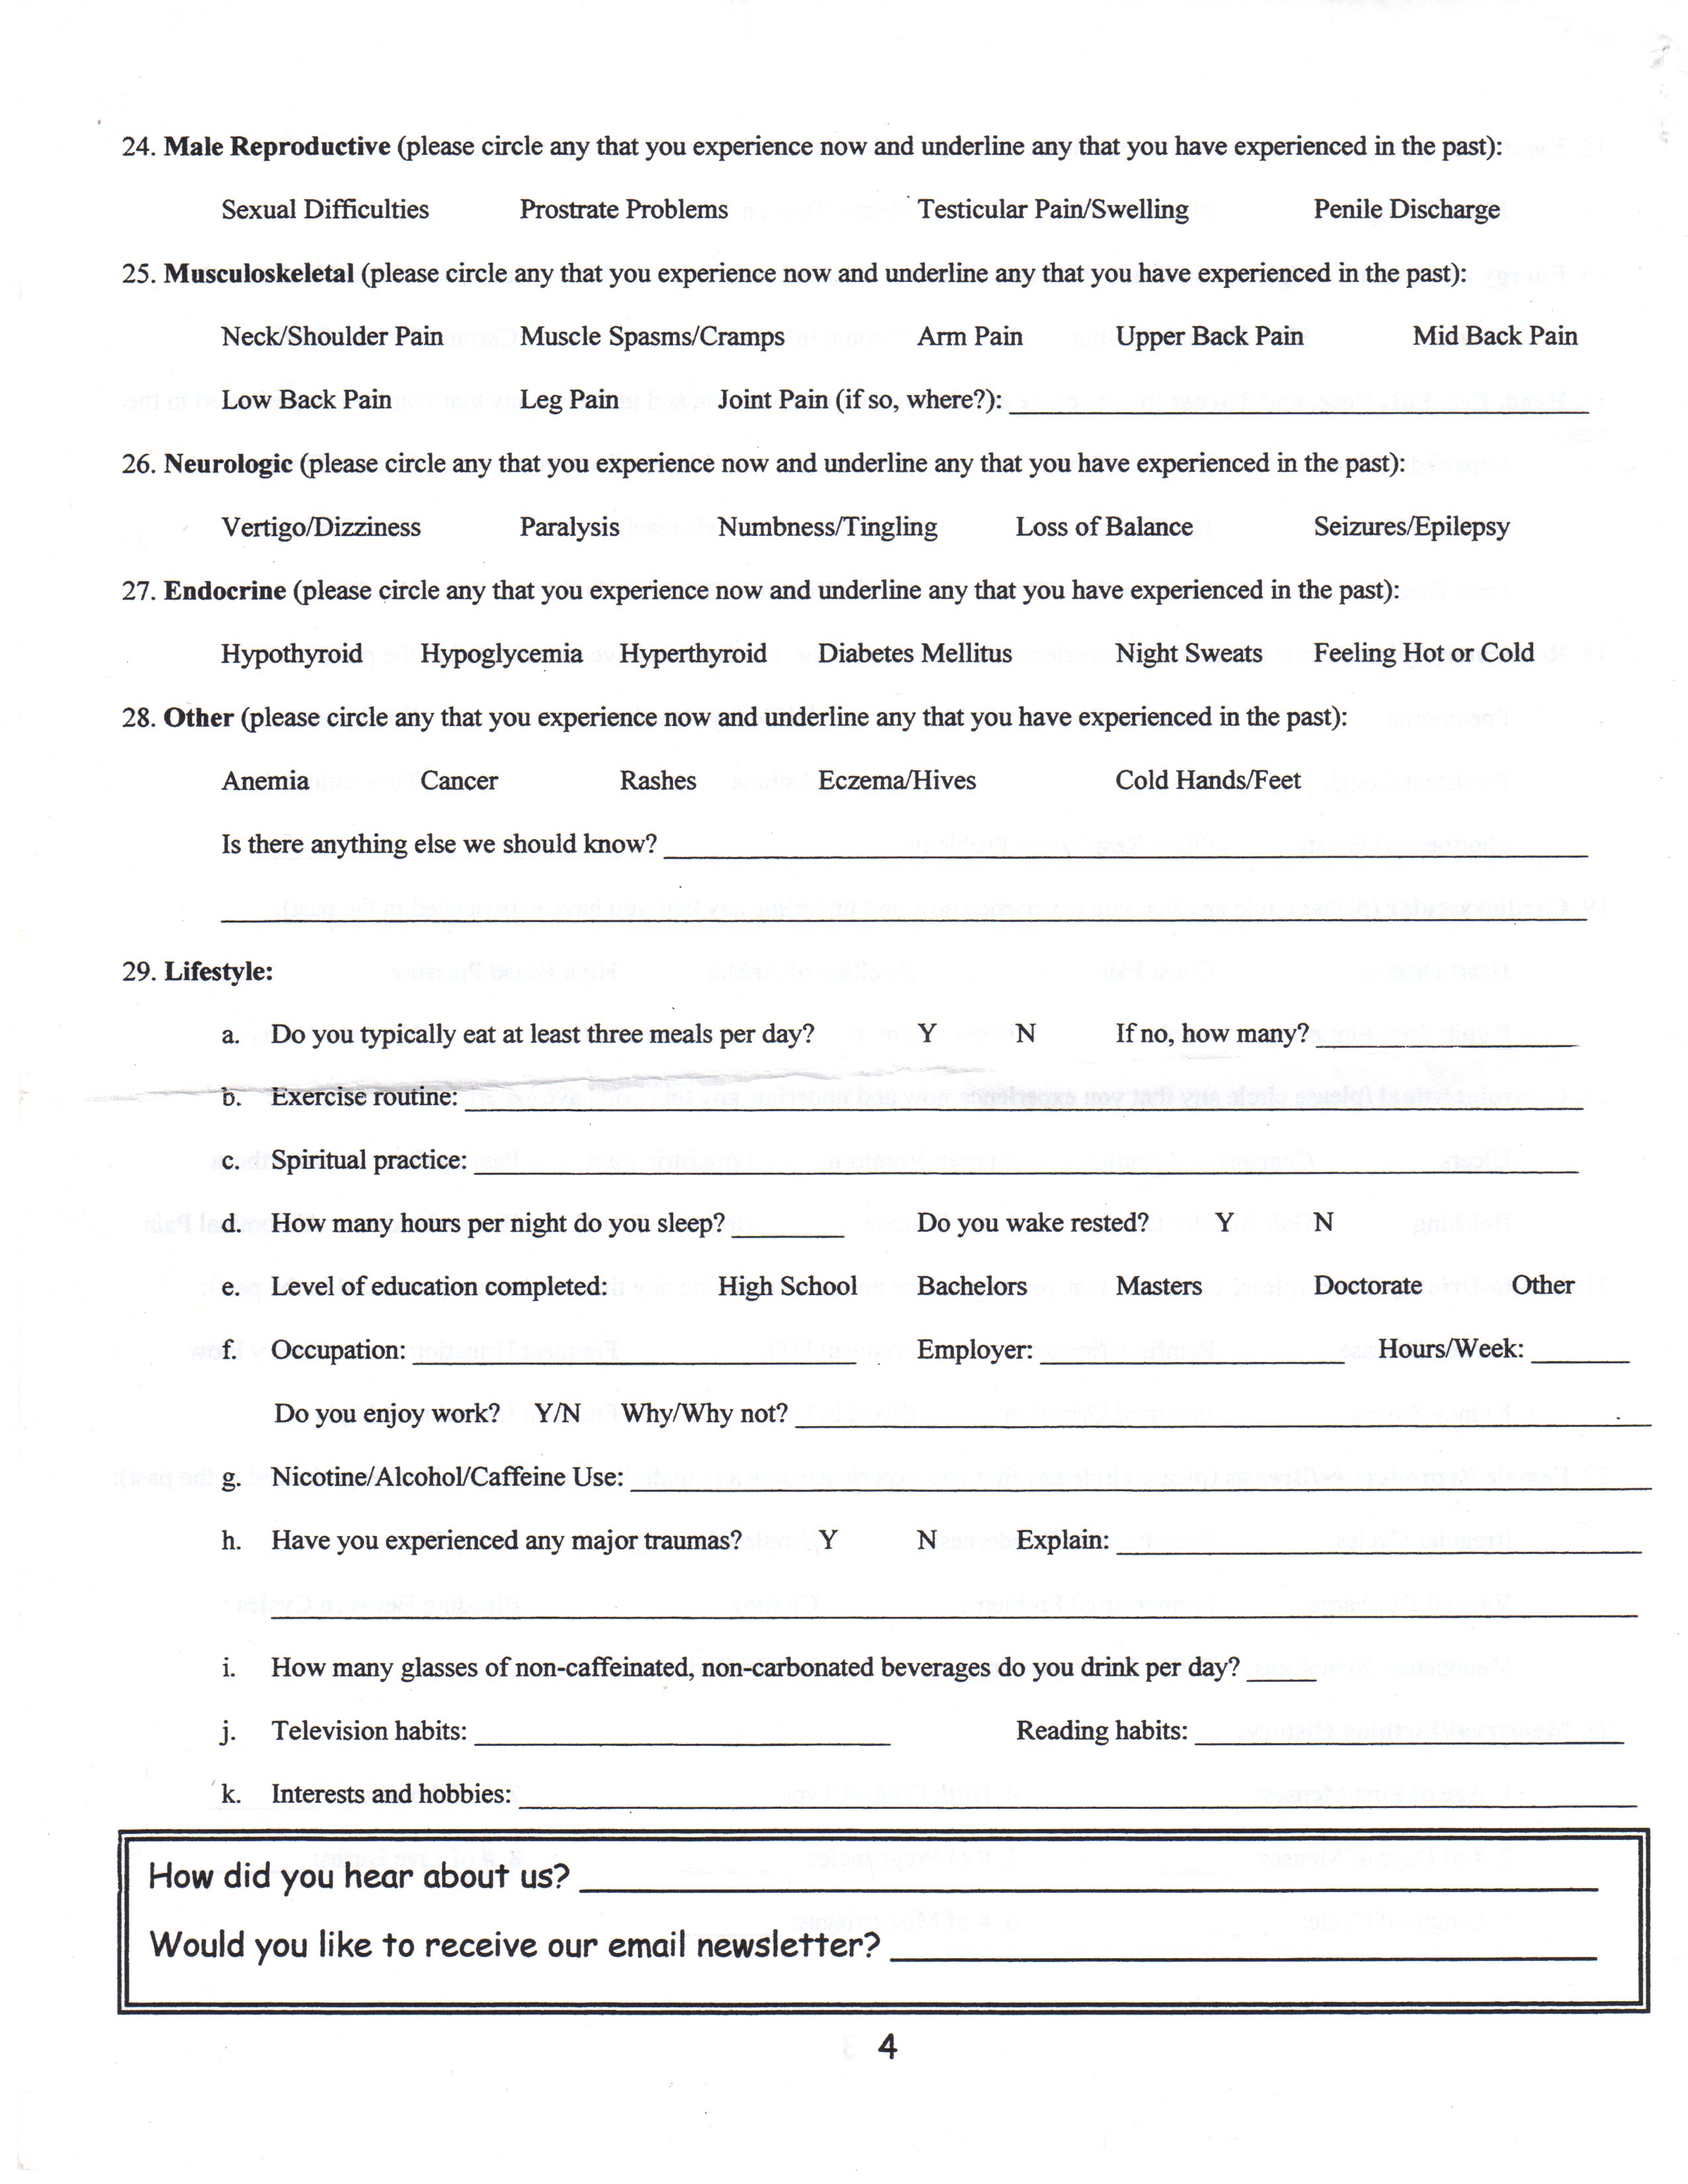 Counseling Intake Form Fill Online, Printable, Fillable, Blank 